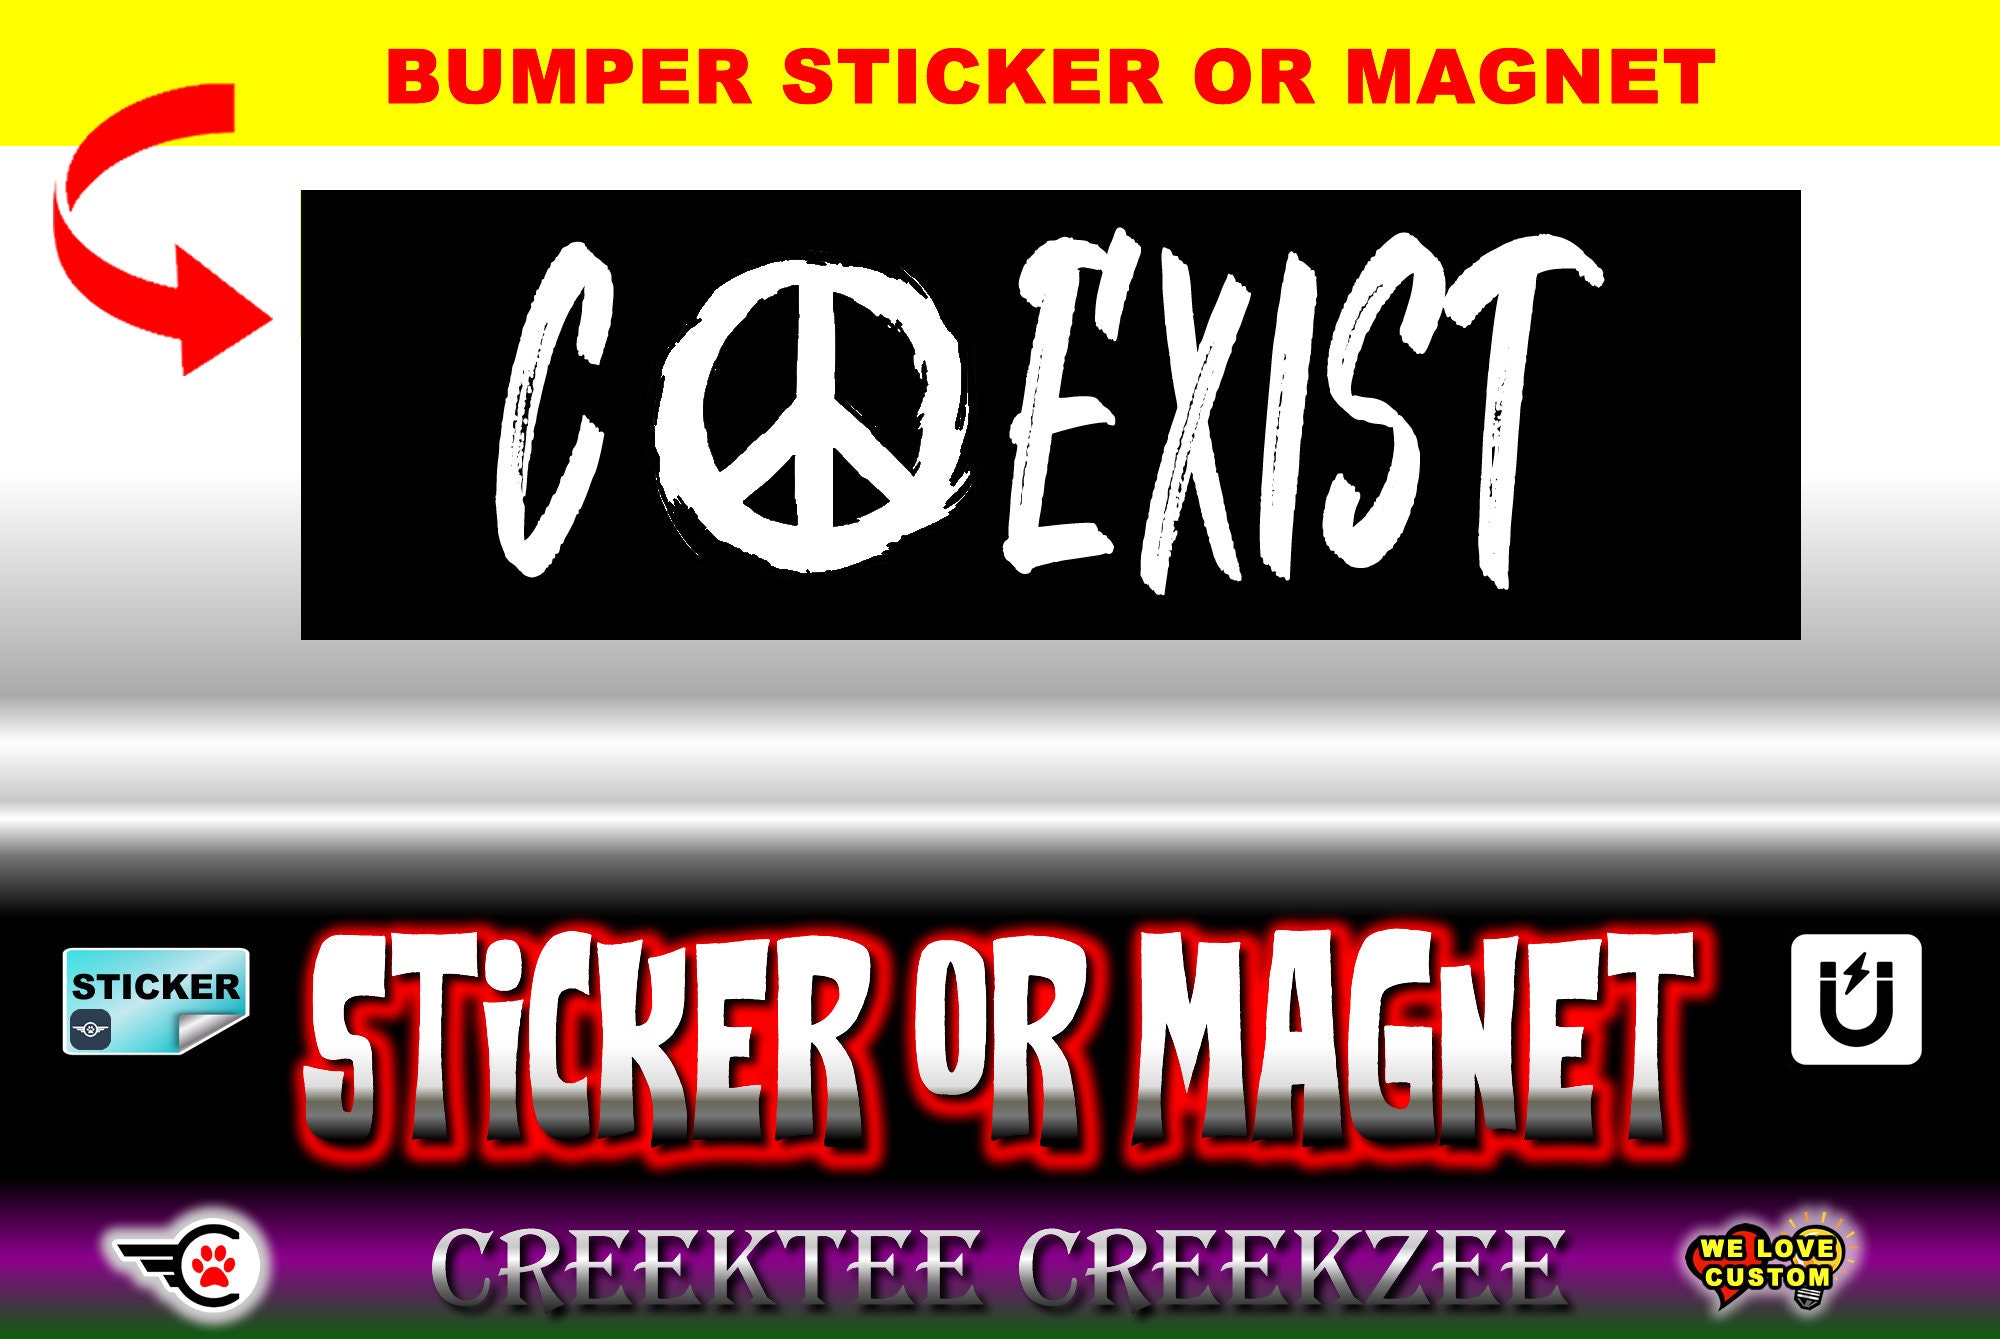 COEXIST Bumper Sticker or Magnet with your text, image or artwork, 8